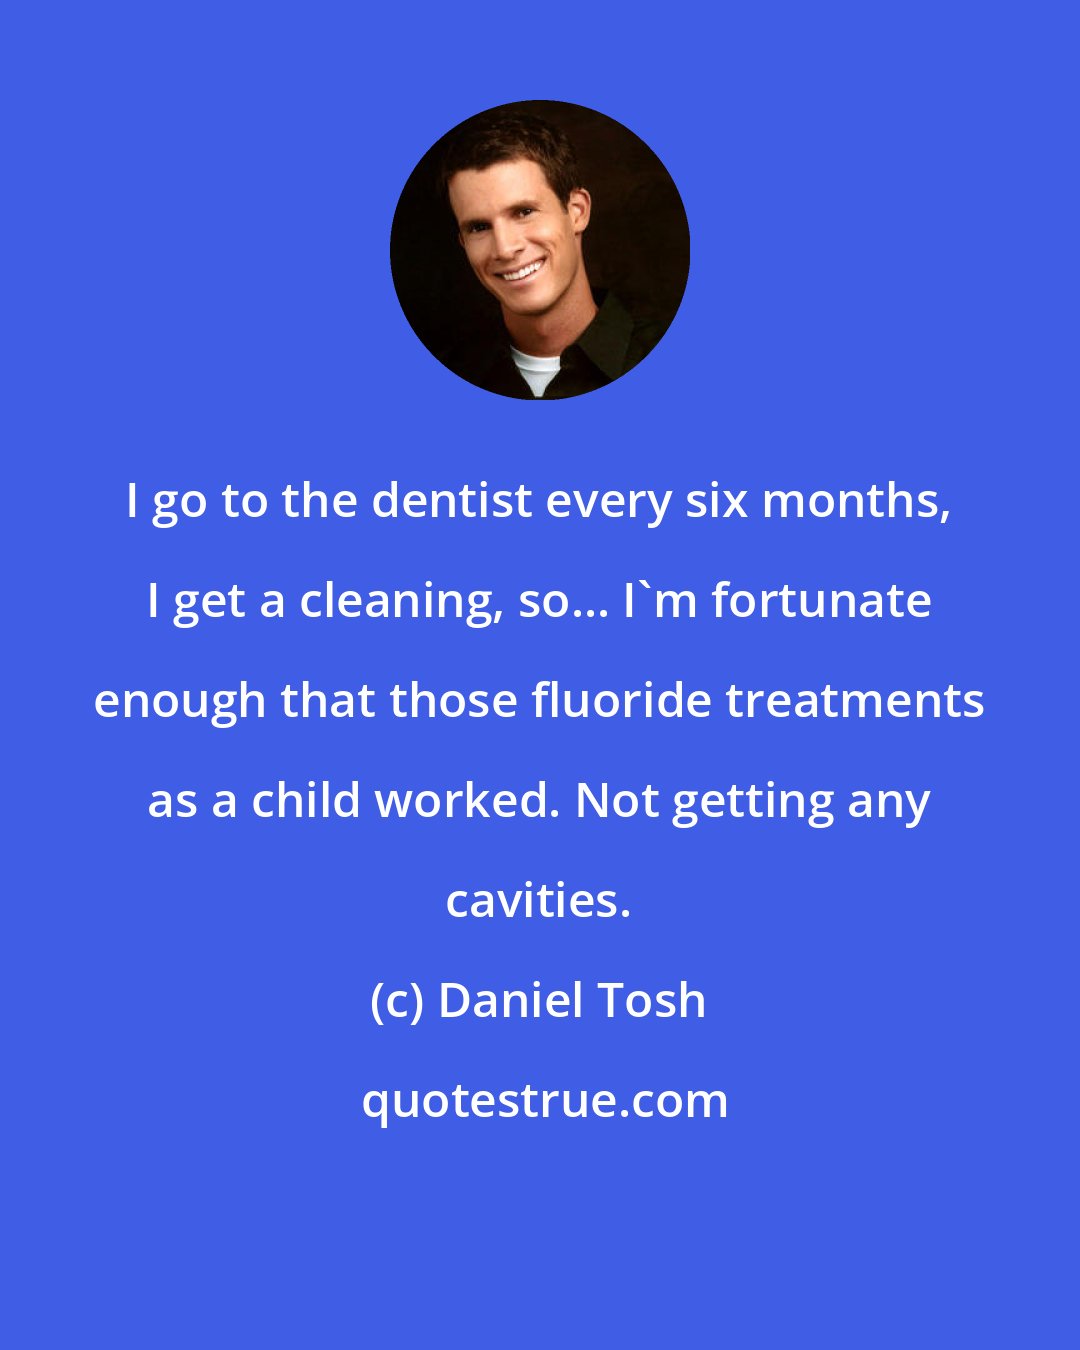 Daniel Tosh: I go to the dentist every six months, I get a cleaning, so... I'm fortunate enough that those fluoride treatments as a child worked. Not getting any cavities.